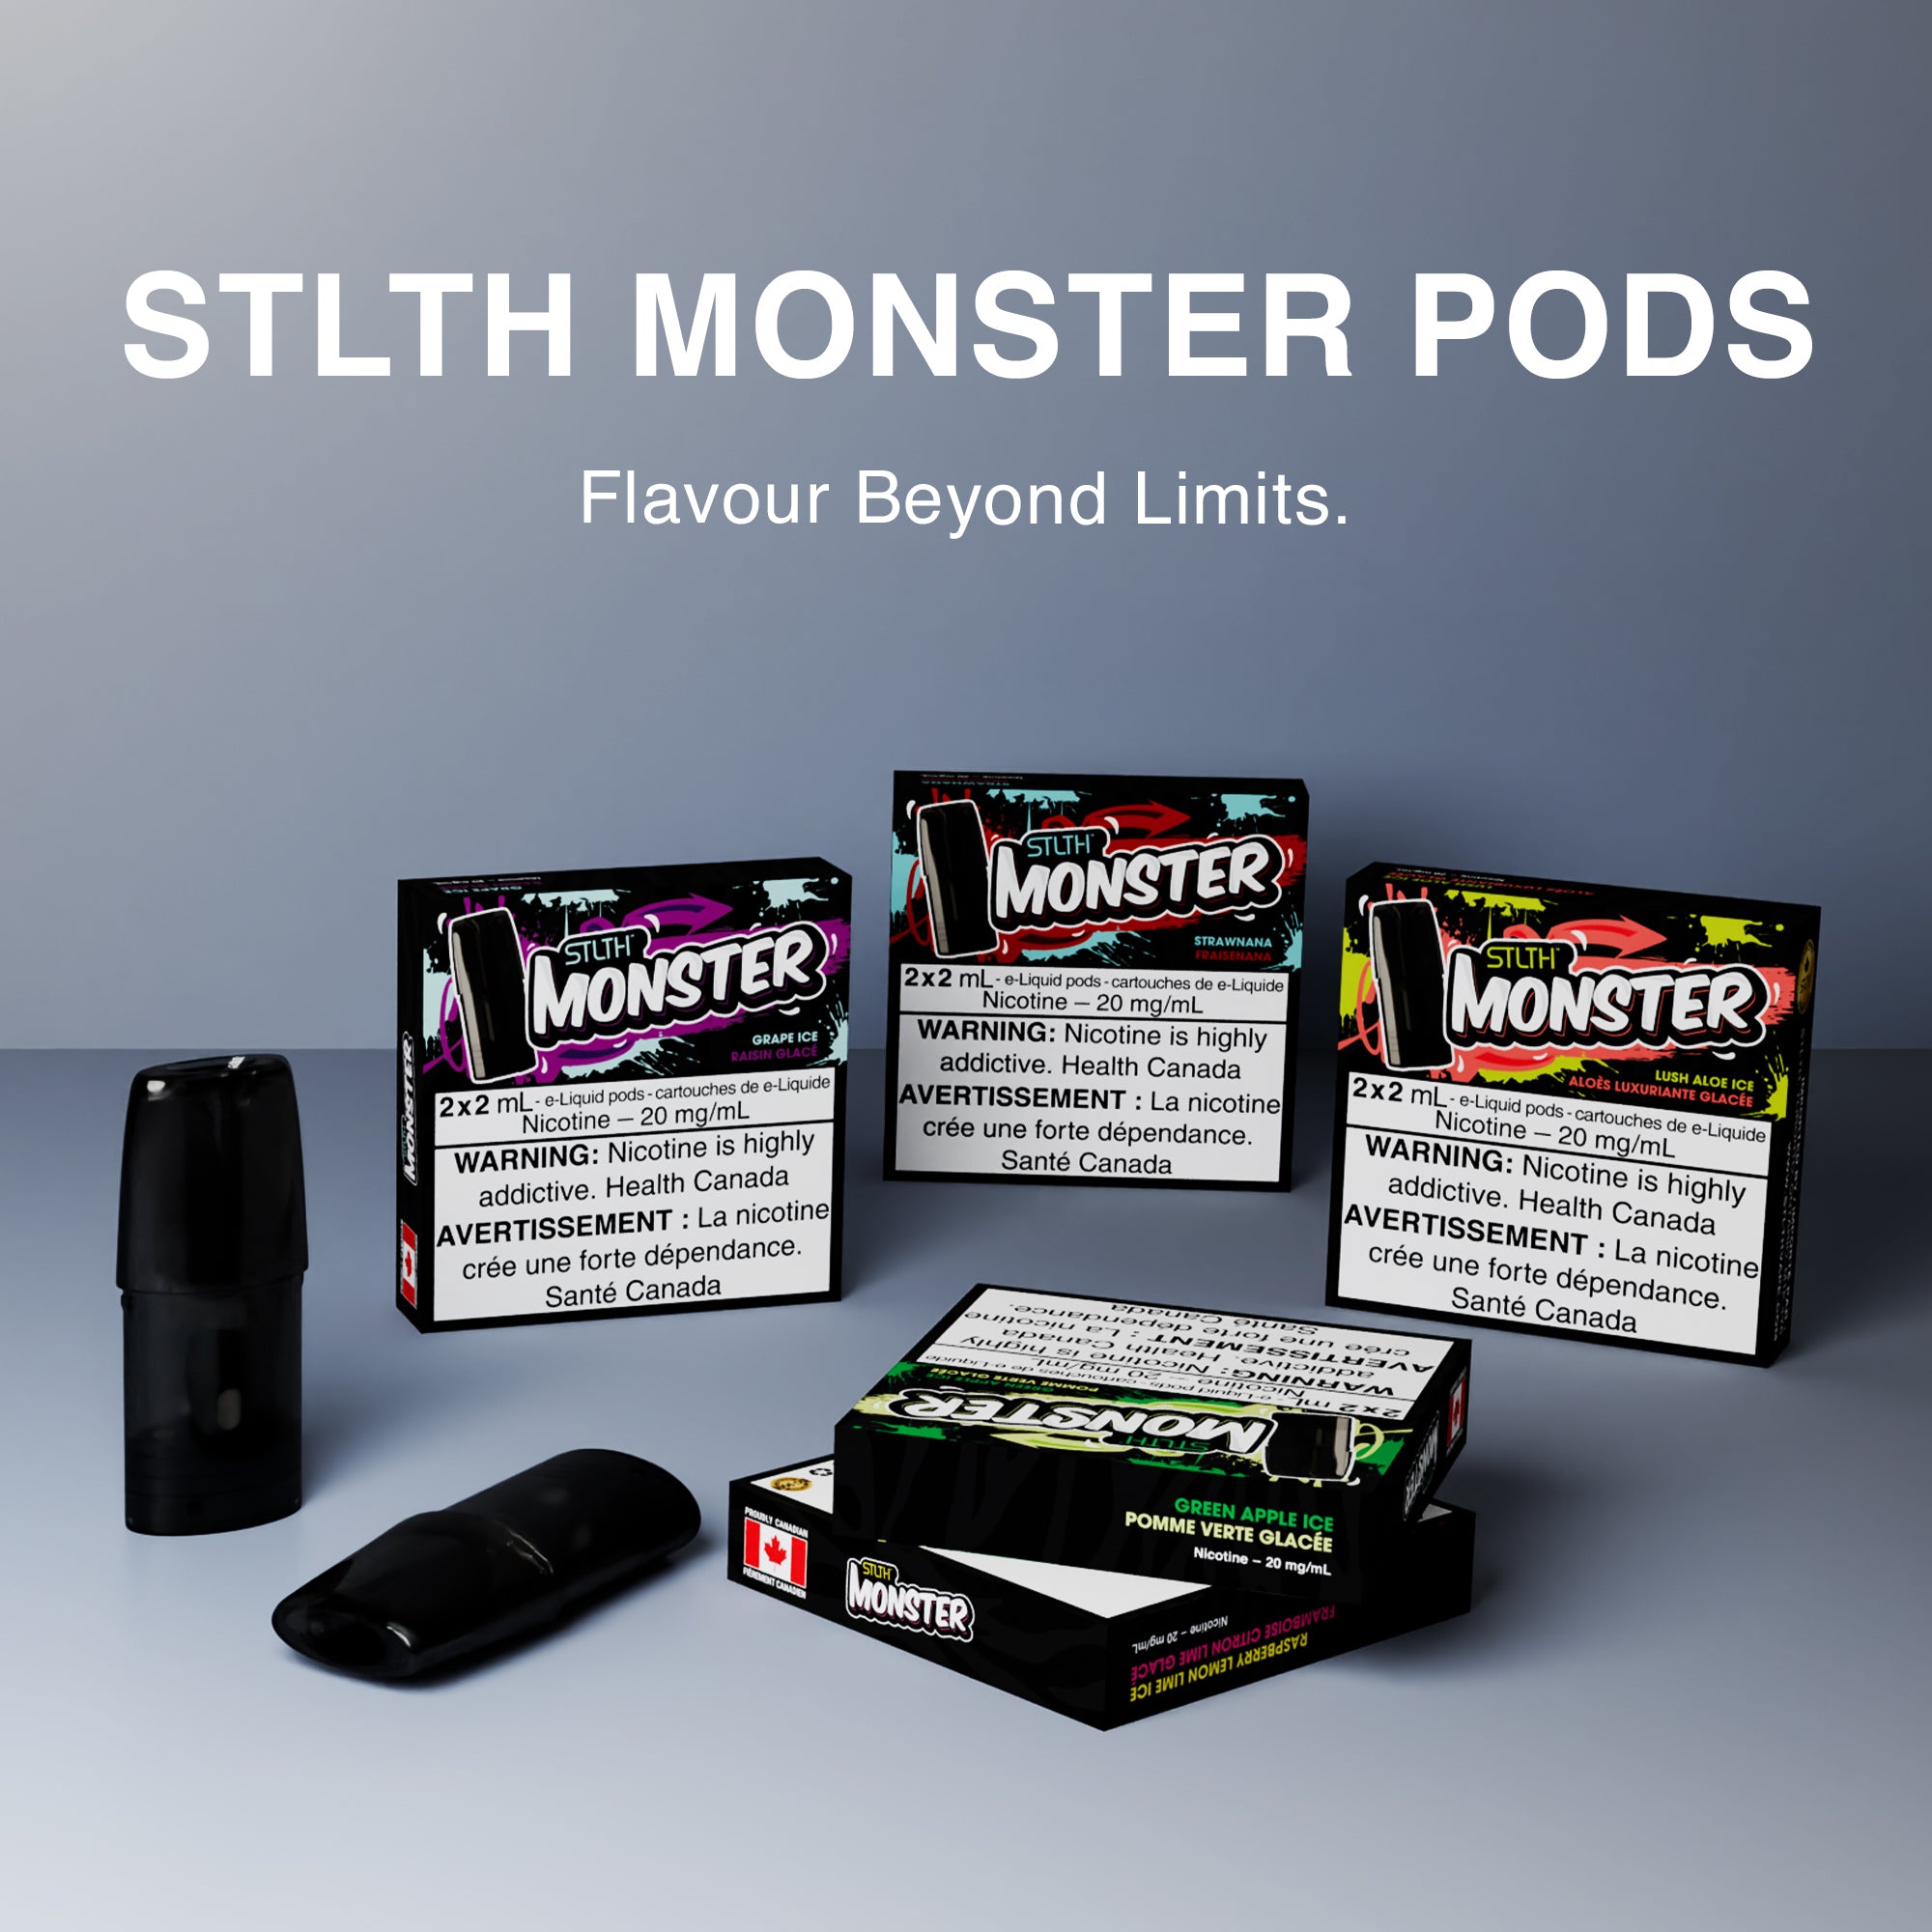 STLTH MONSTER: Flavour Beyound Limits.